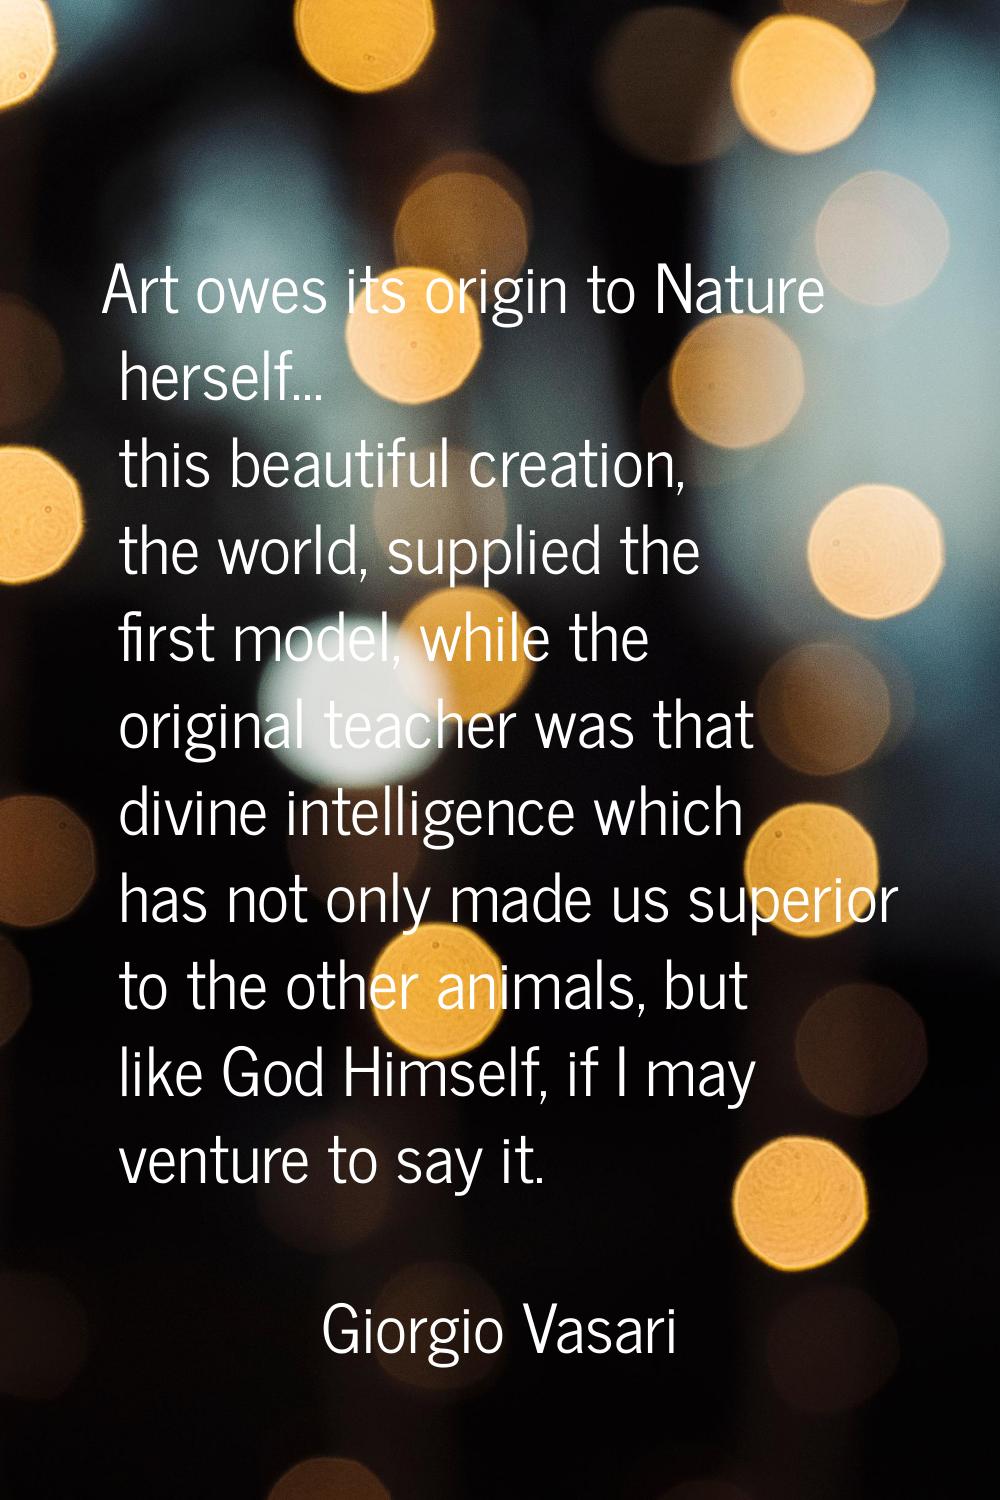 Art owes its origin to Nature herself... this beautiful creation, the world, supplied the first mod